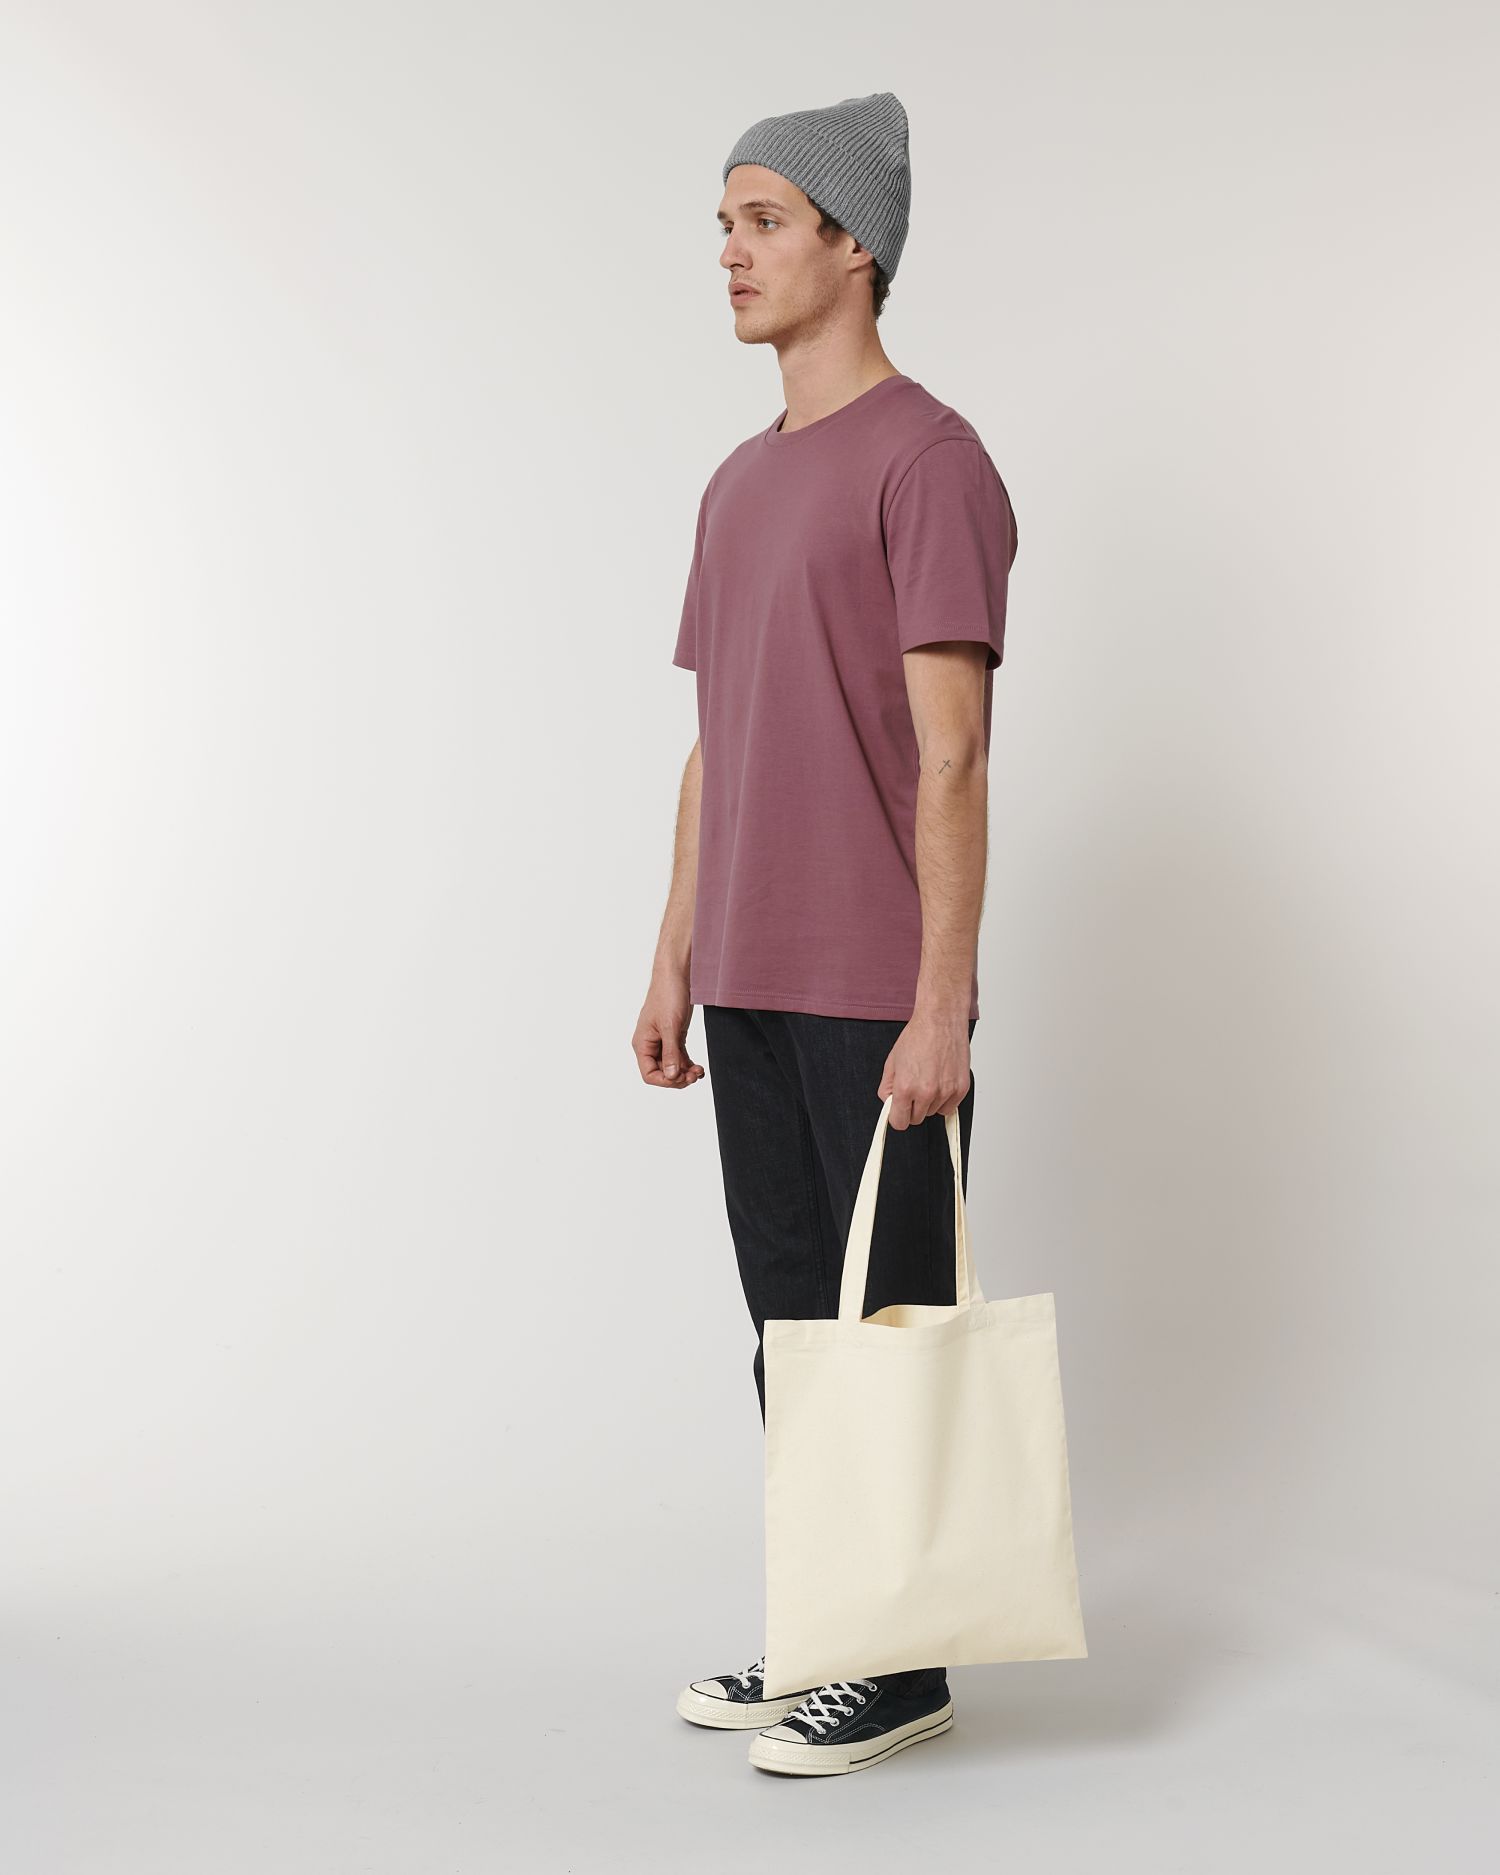  Light Tote Bag in Farbe Natural Raw